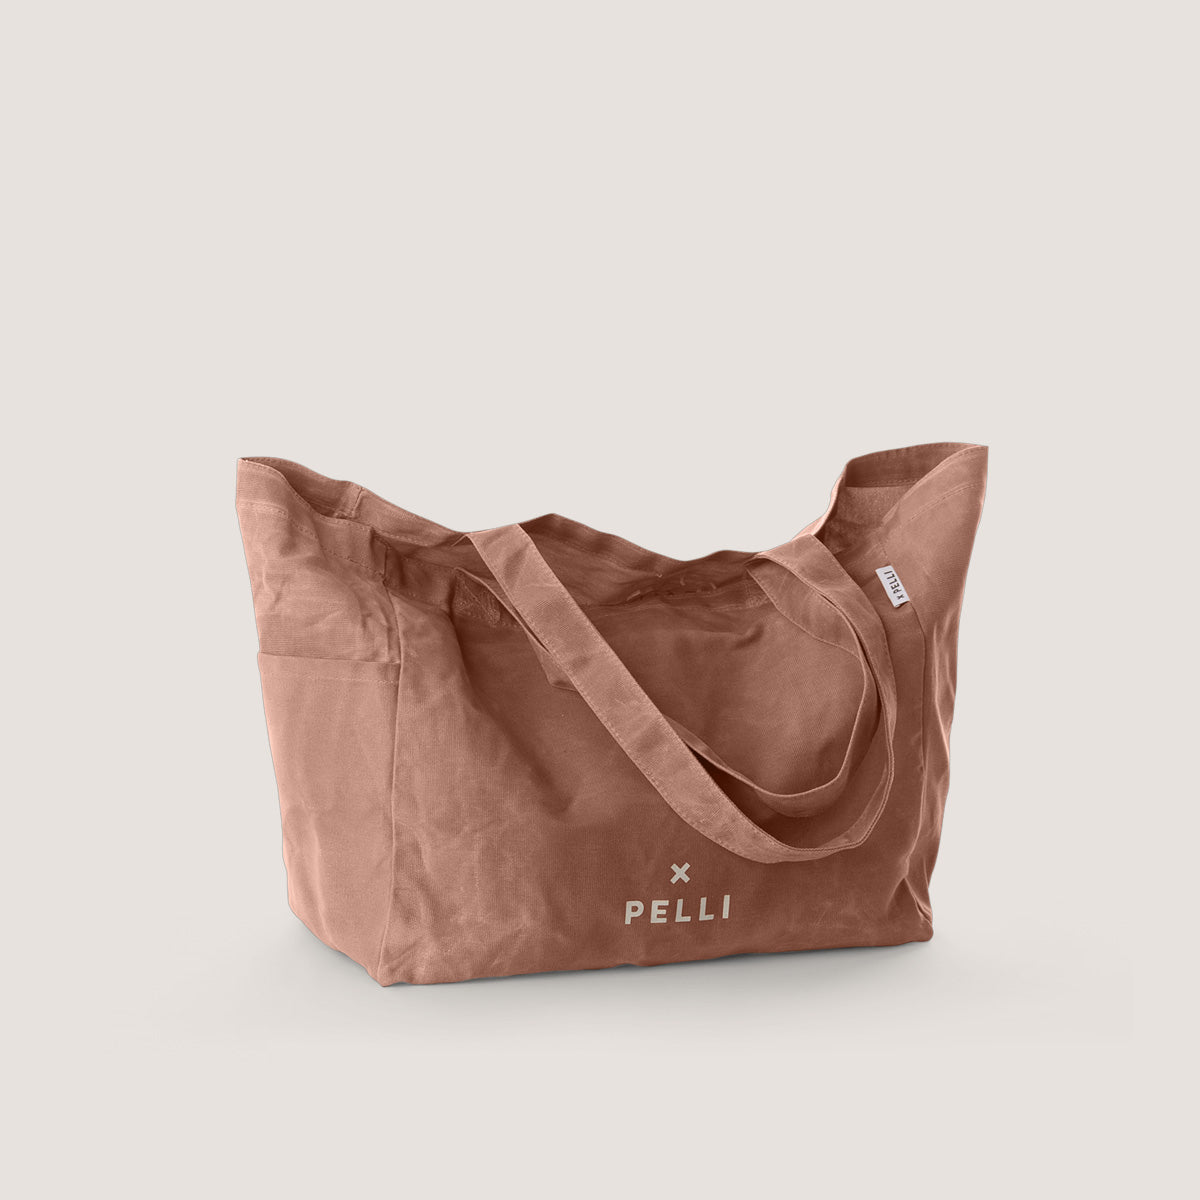 Waxed Canvas Tote Bag in Spanish Villa Pink